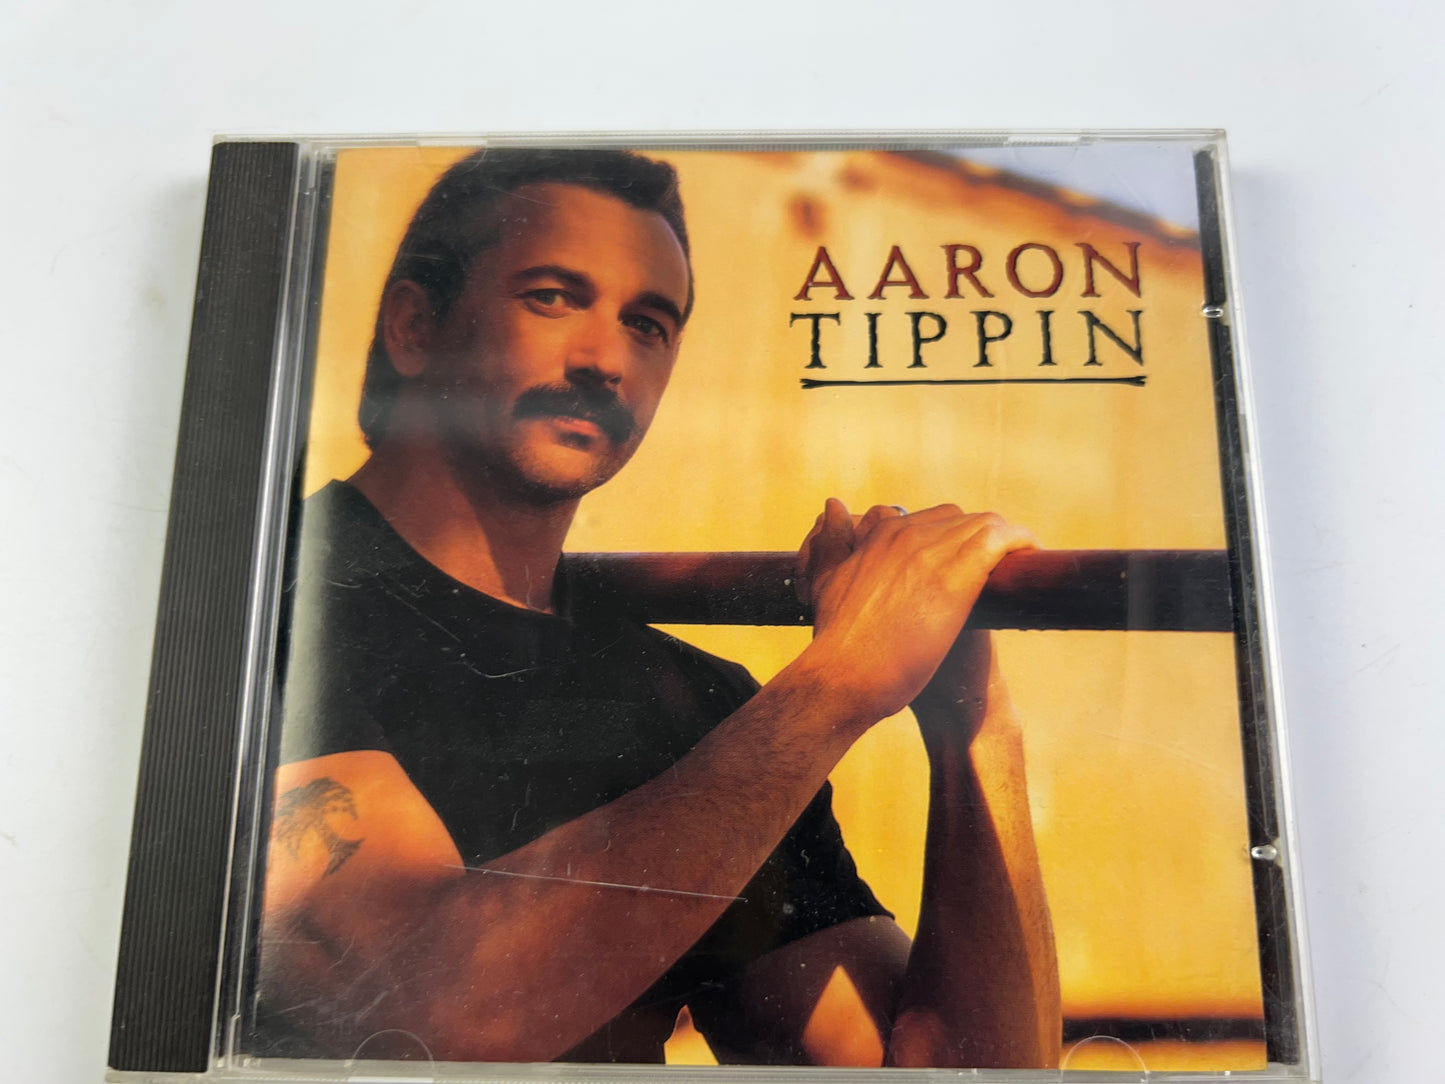 Tool Box - Audio CD By Aaron Tippin